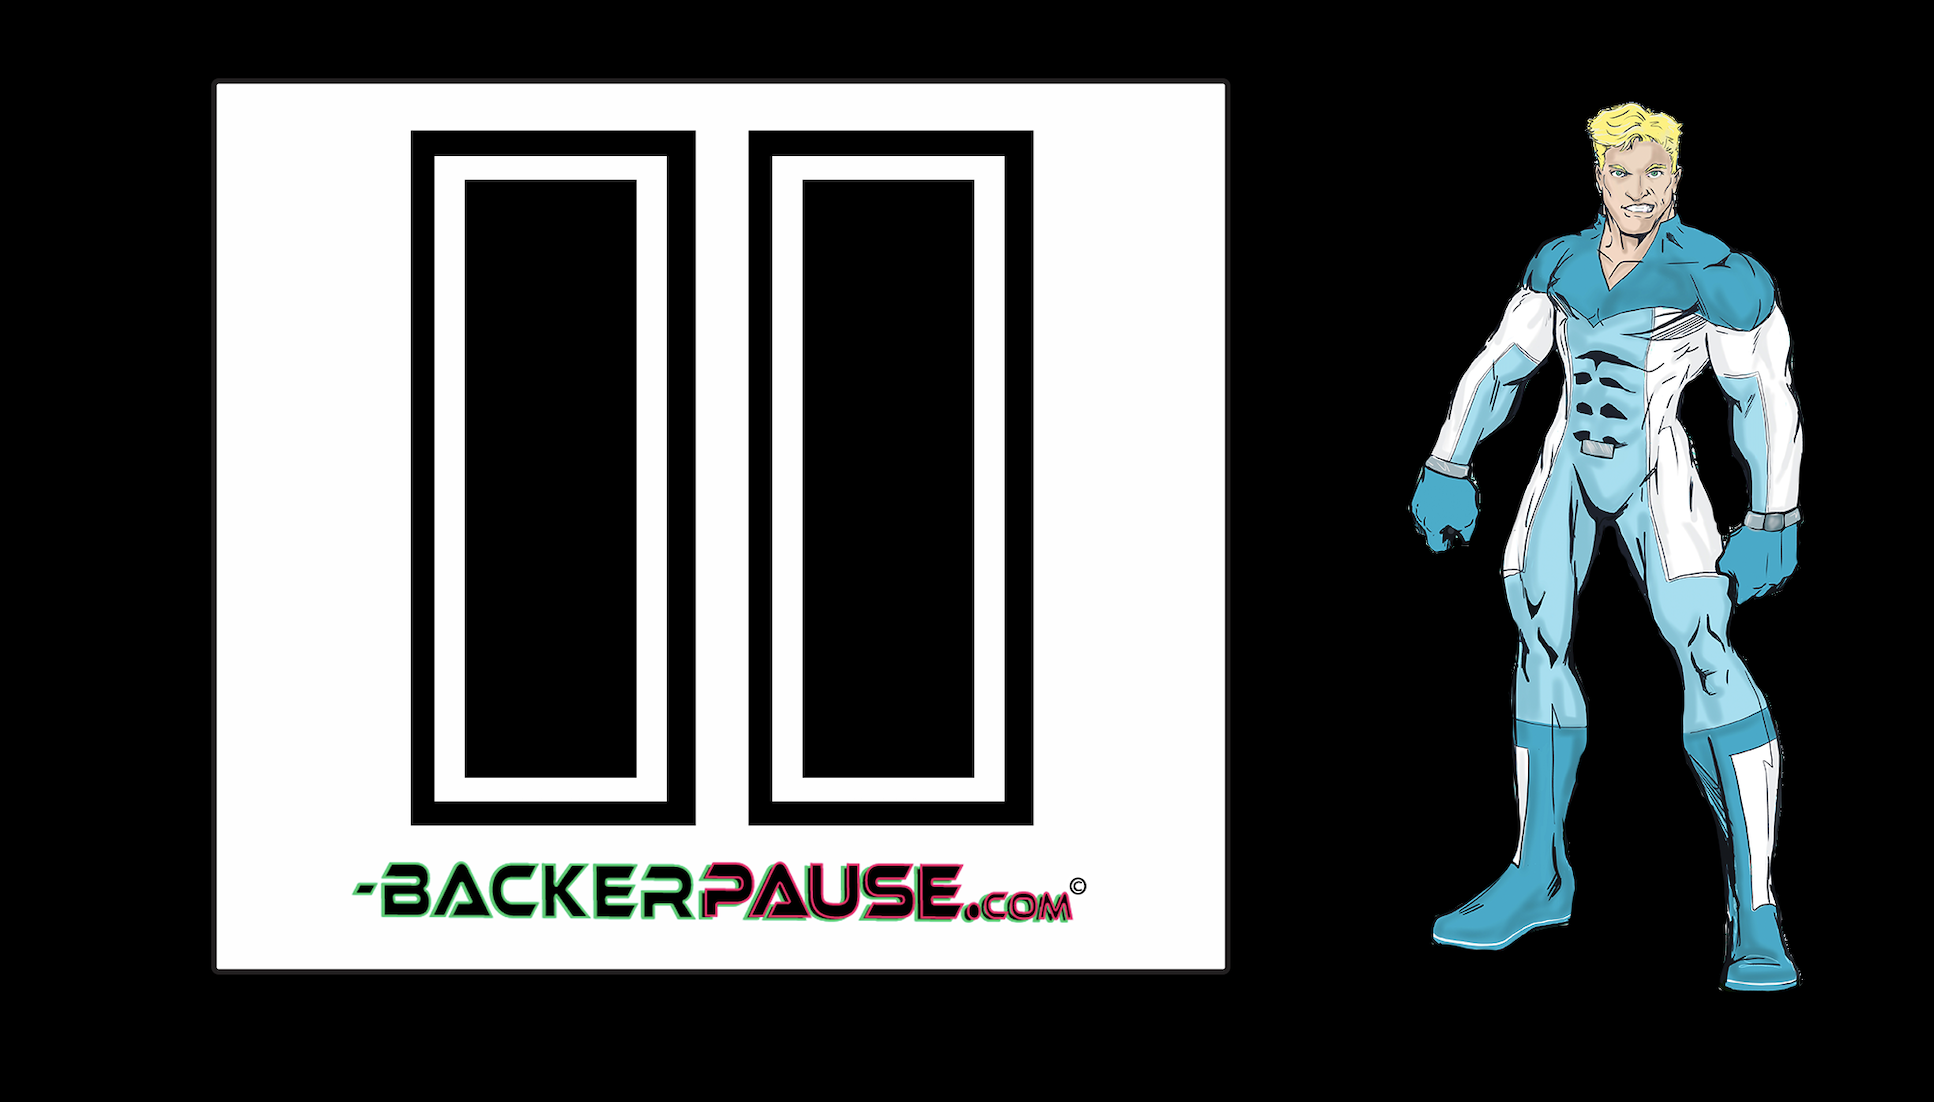 The INFLUENCE of BACKERS on BACKER PAUSE